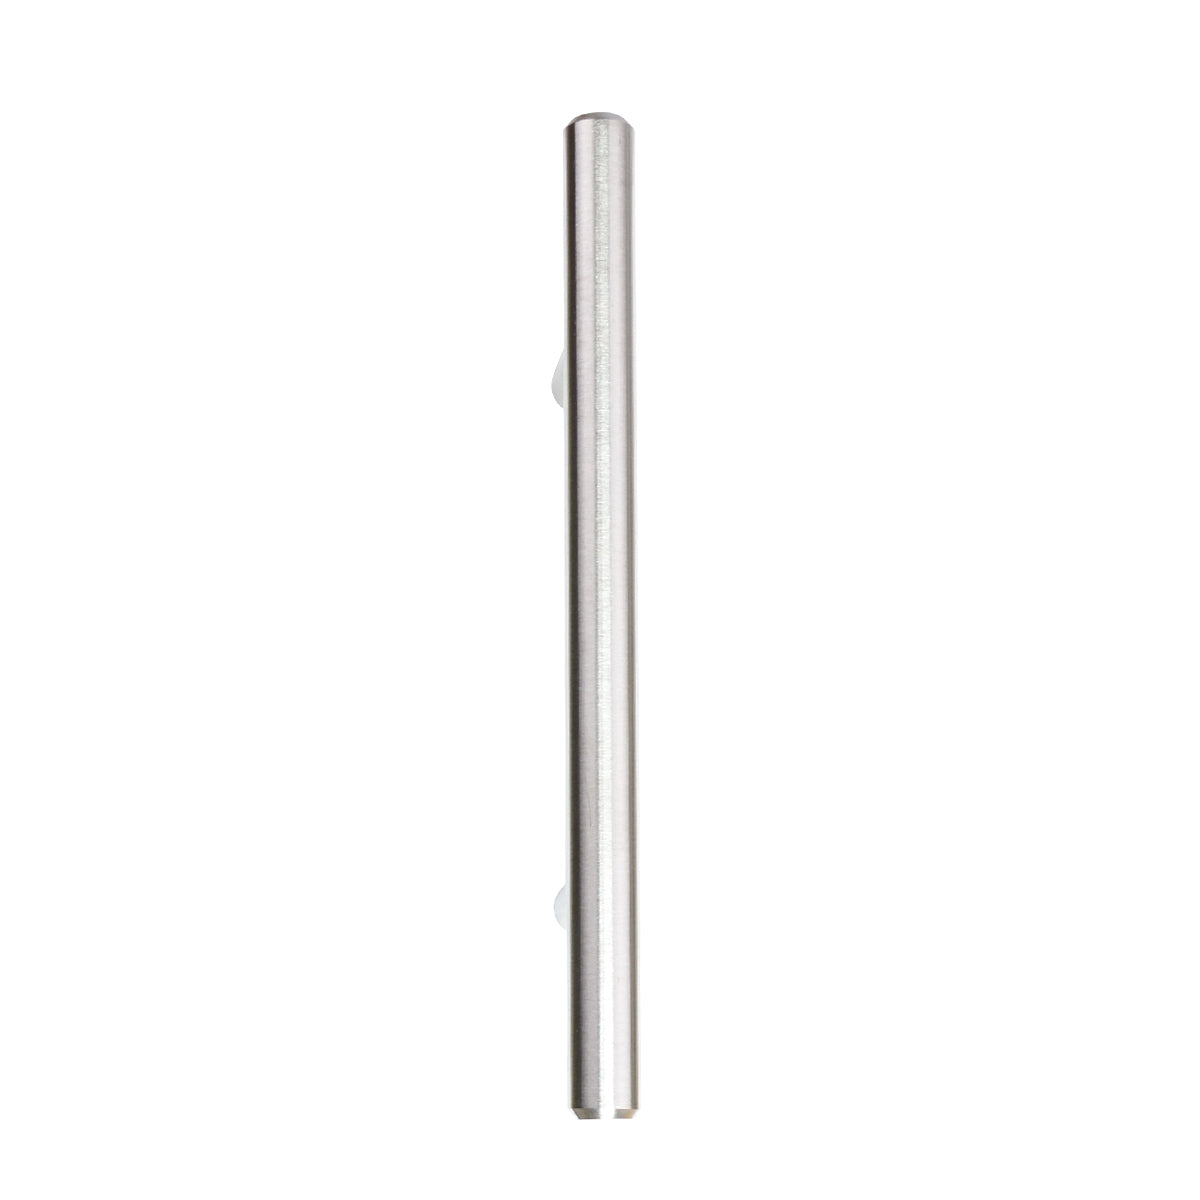 South Main Hardware Euro Bar Cabinet Handle (3/8" Diameter), 5.38" Length (3" Hole Center), Stainless Steel